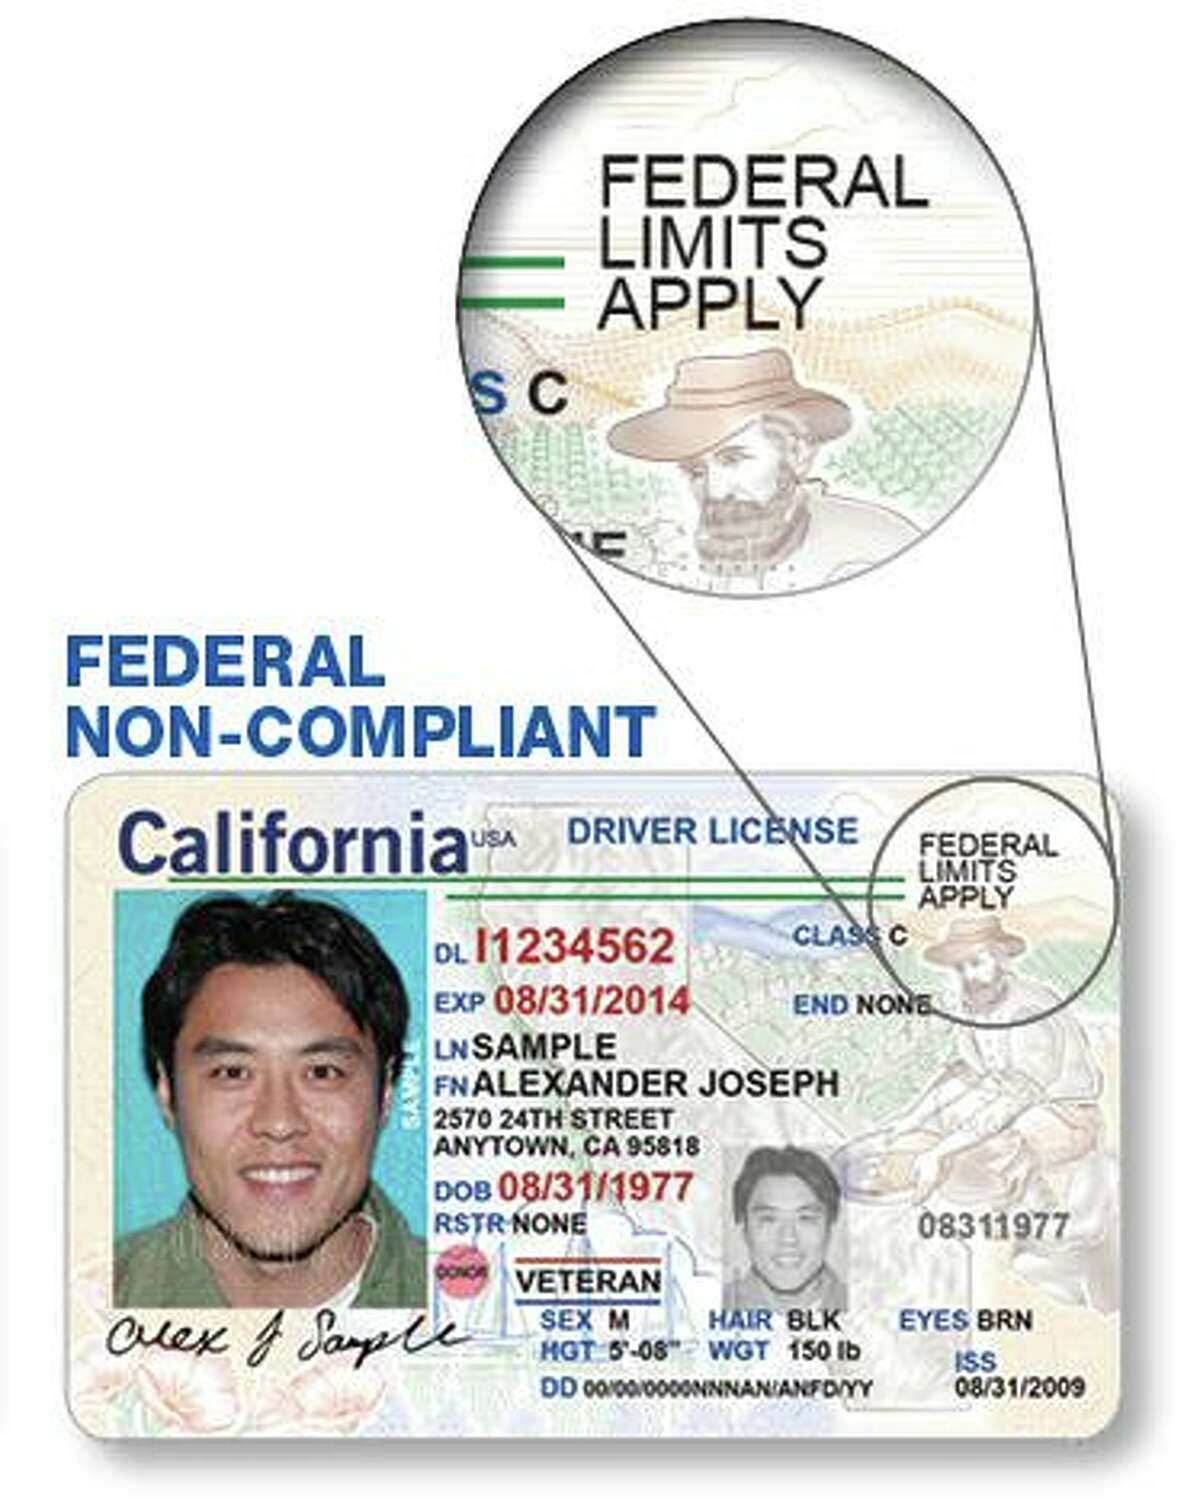 Real ID deadline extended for another 2 years, until May 2025